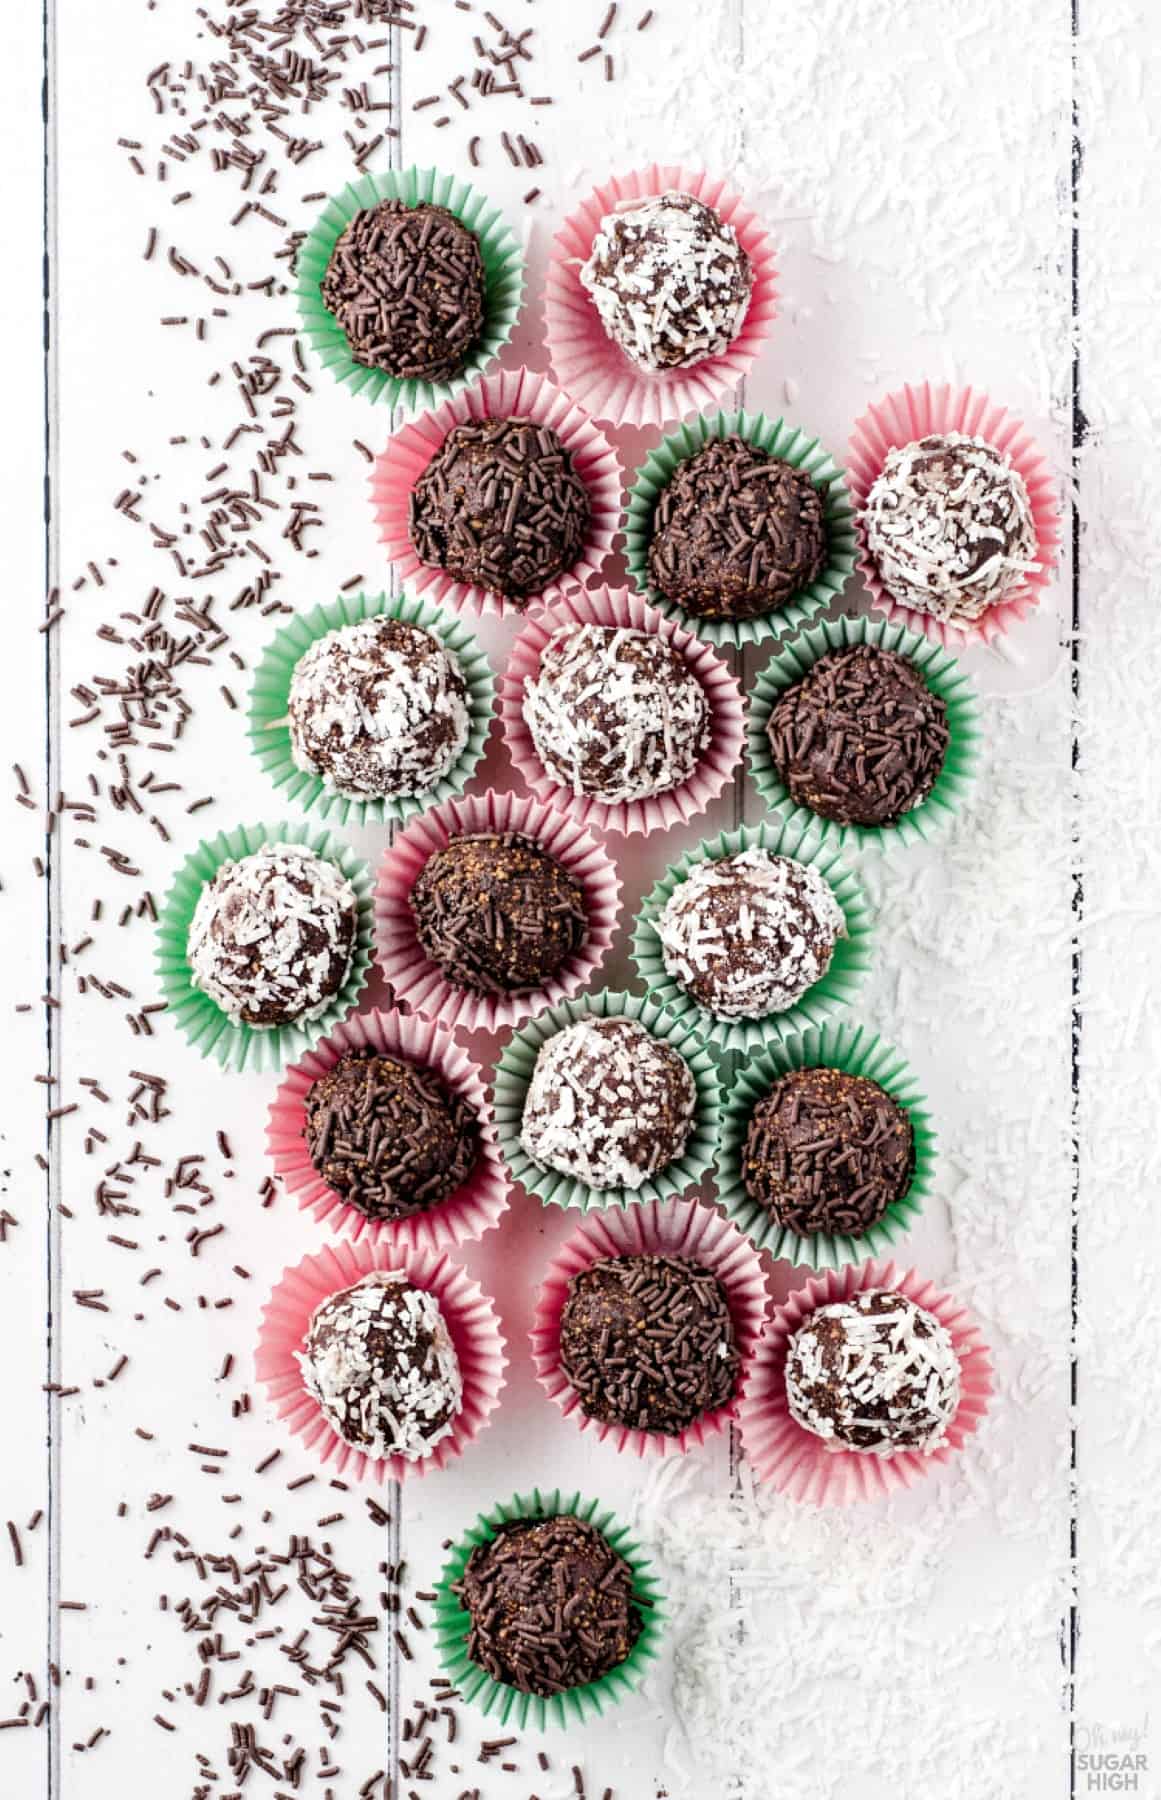 No-Bake Chocolate Rum Balls served in small paper cupcake wrappers on a white tabletop.